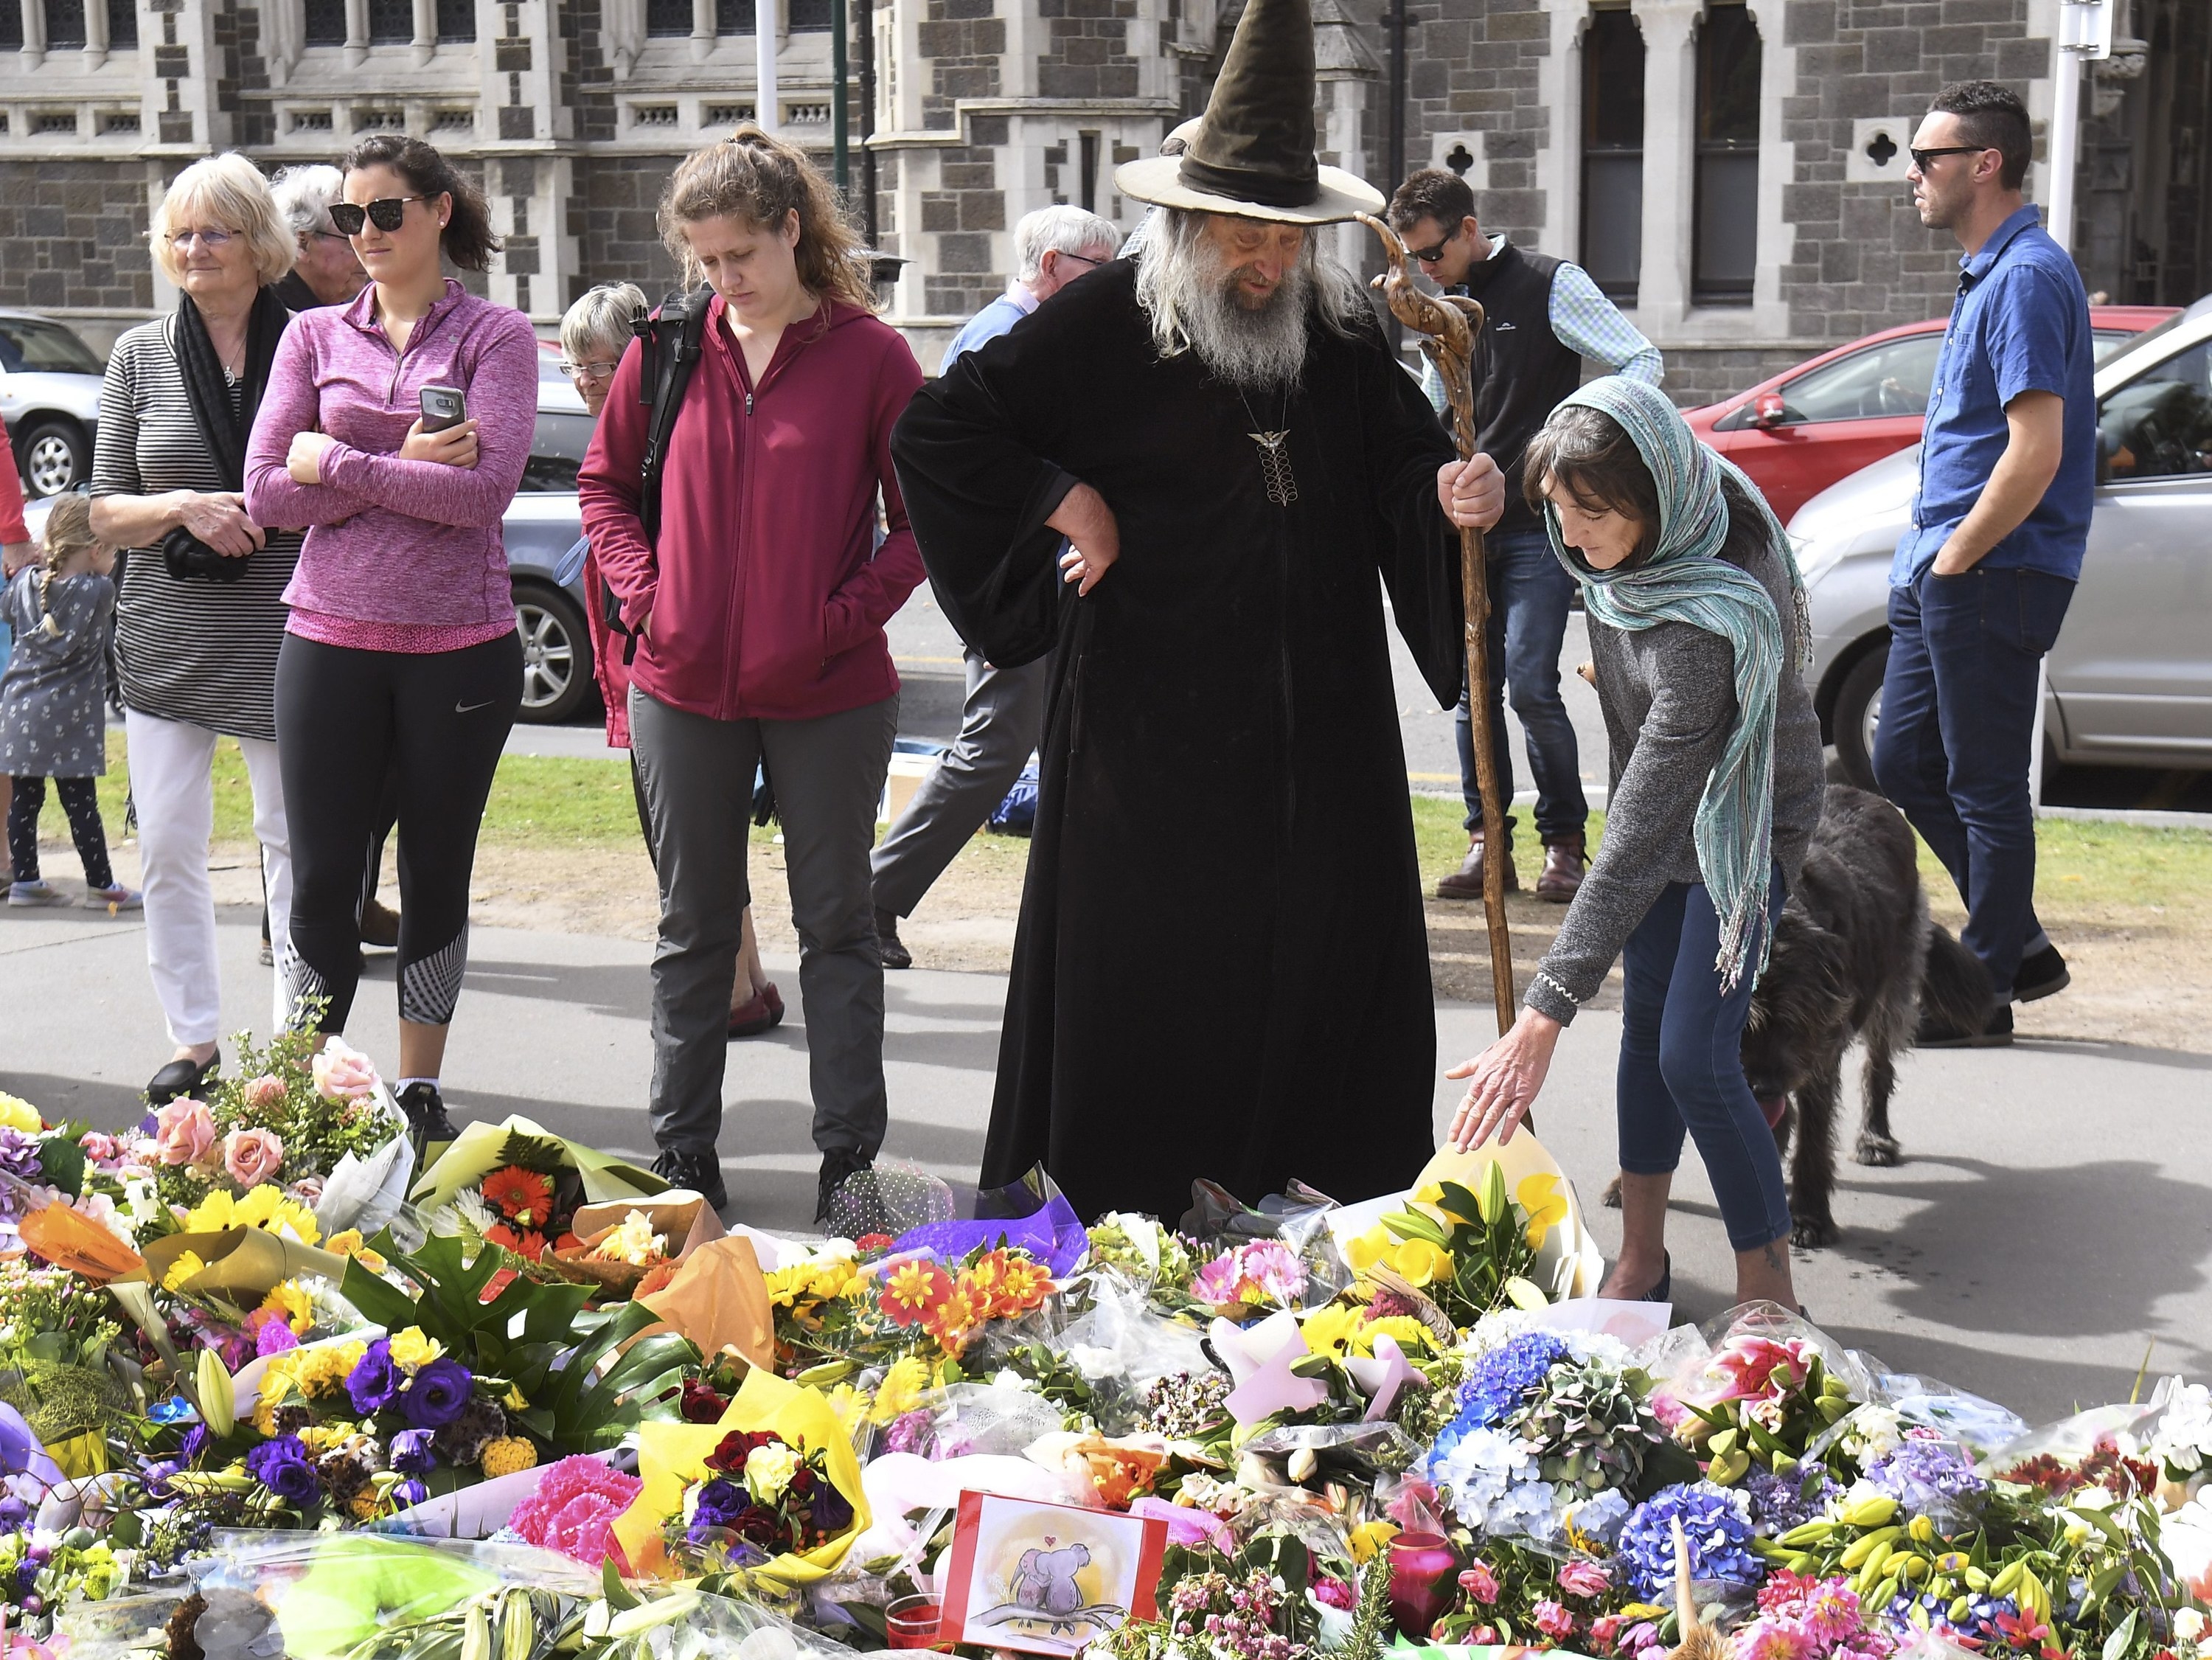 Wizard wearing dark robes standing in front of a memorial blanketed with flowers. There are many people surrounding him